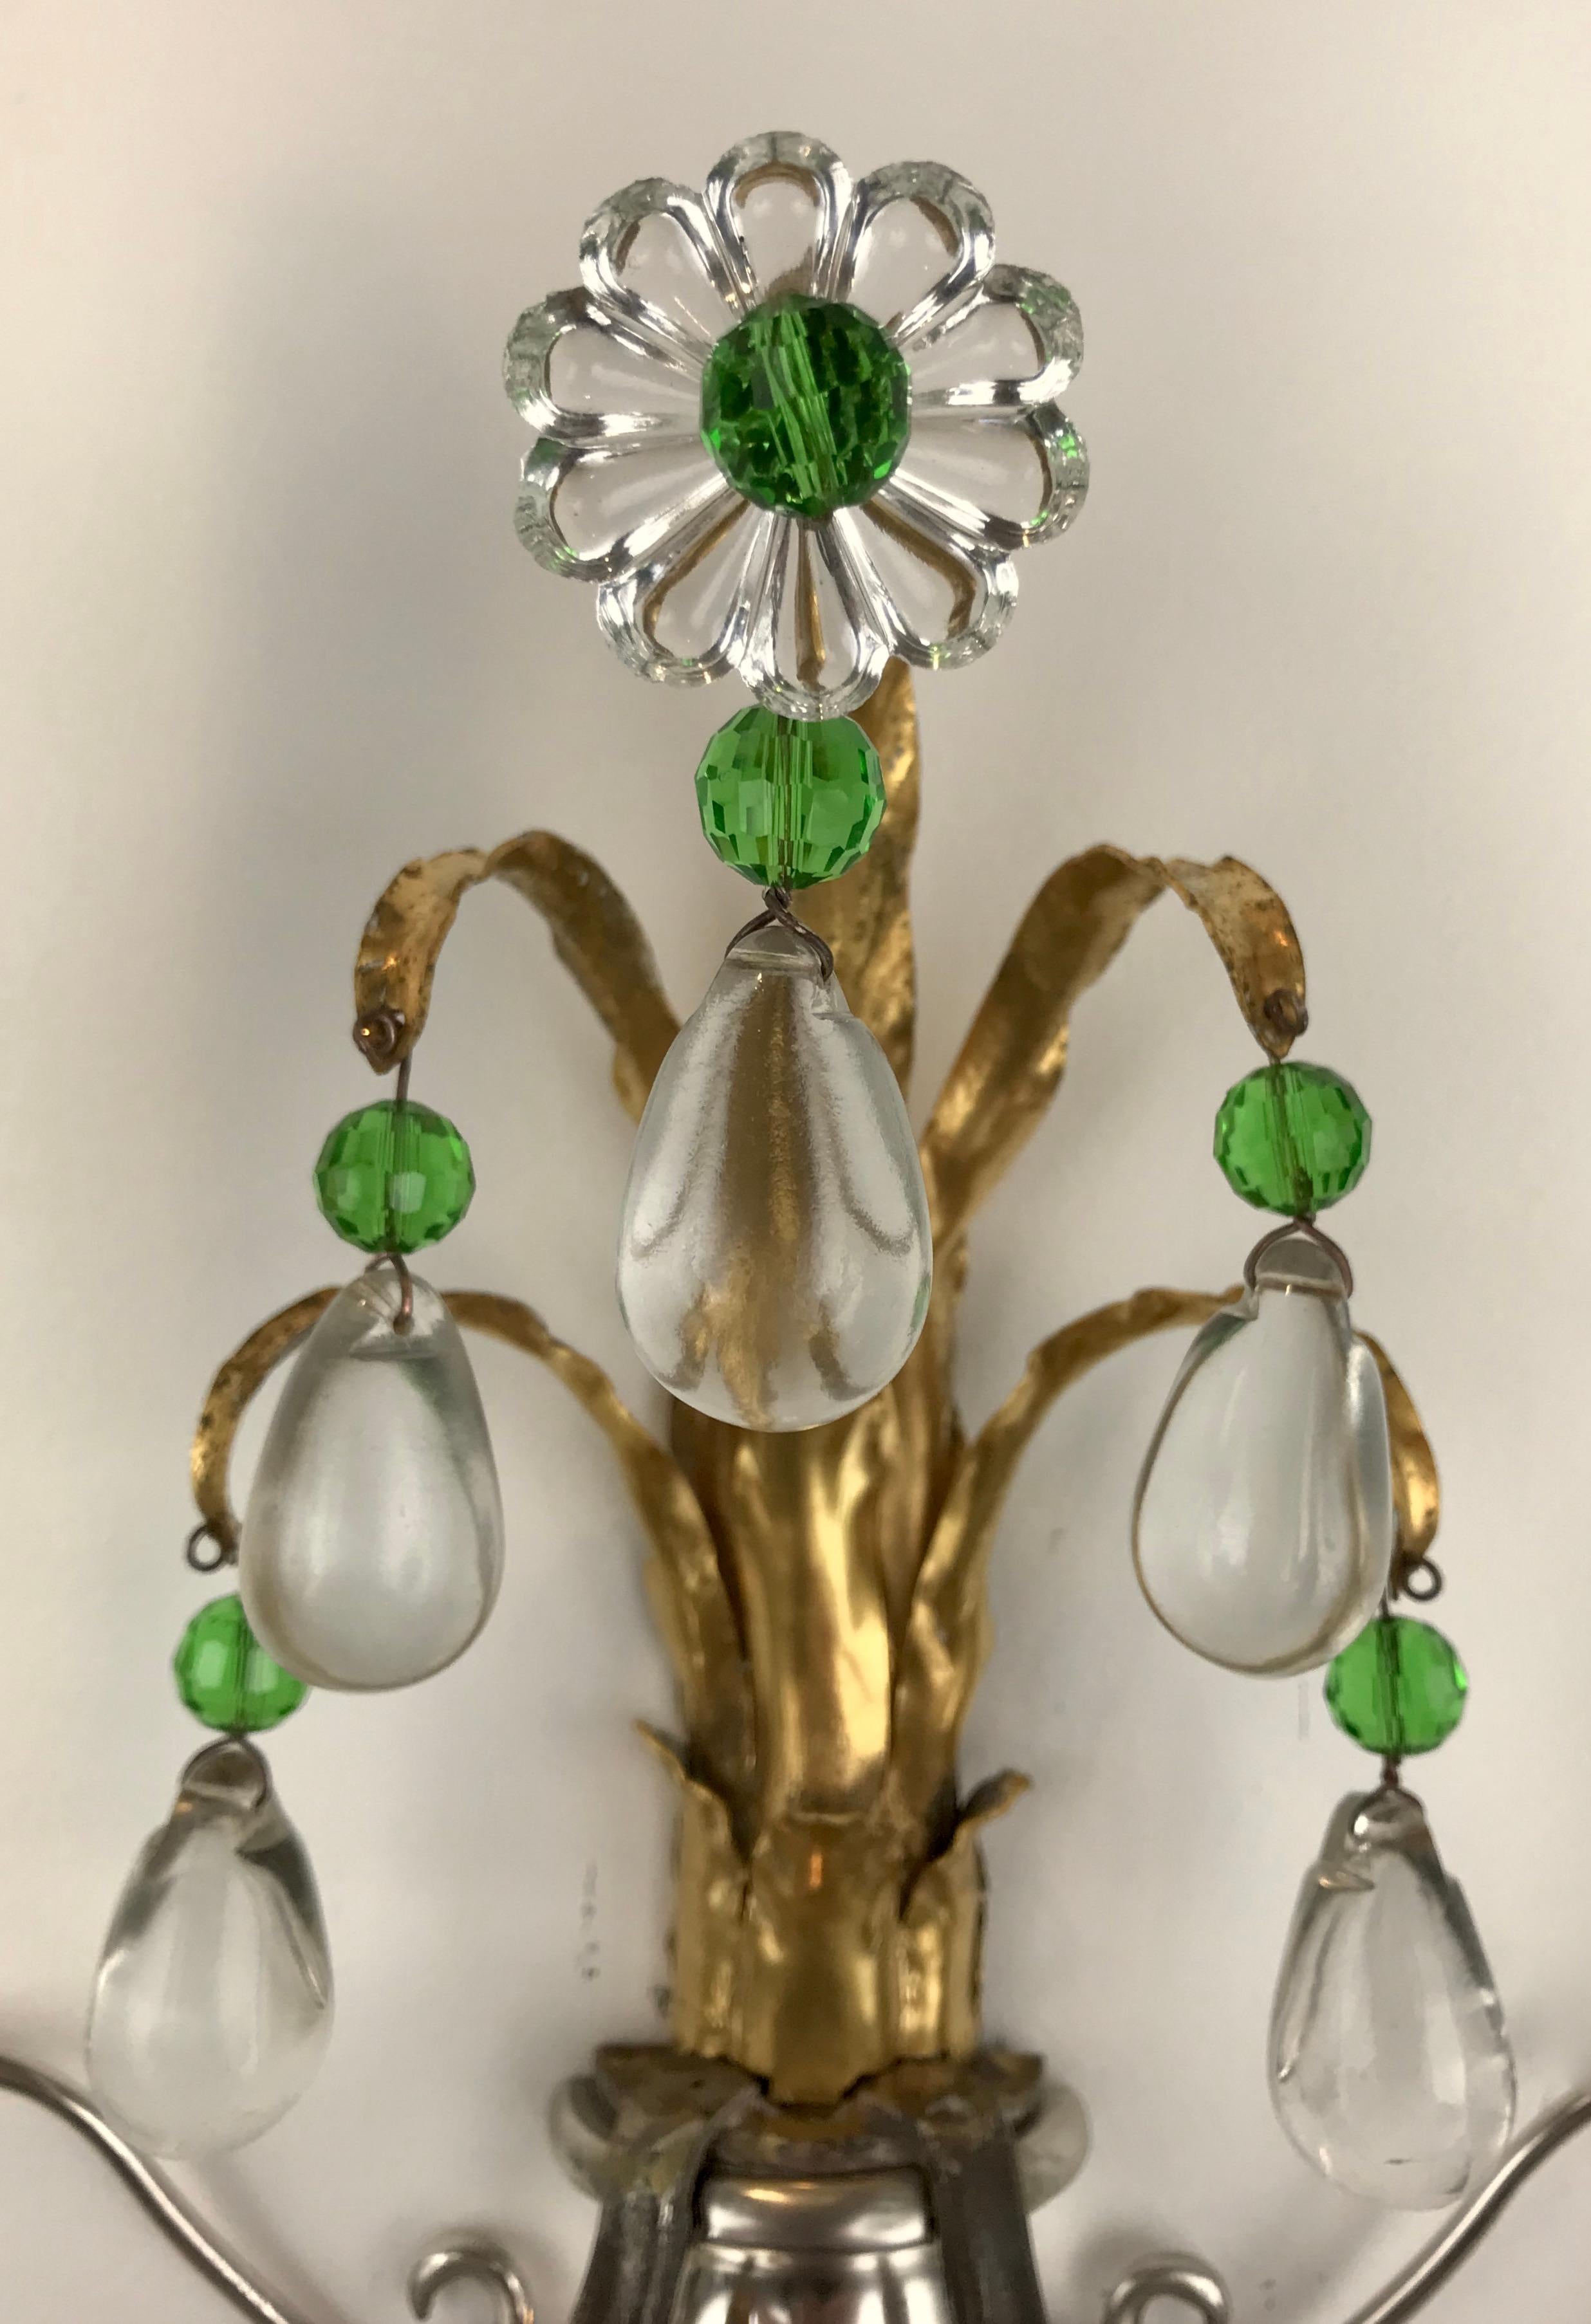  Four Silver and Gilt Bronze Sconces with Green Crystal Accents by Caldwell For Sale 7